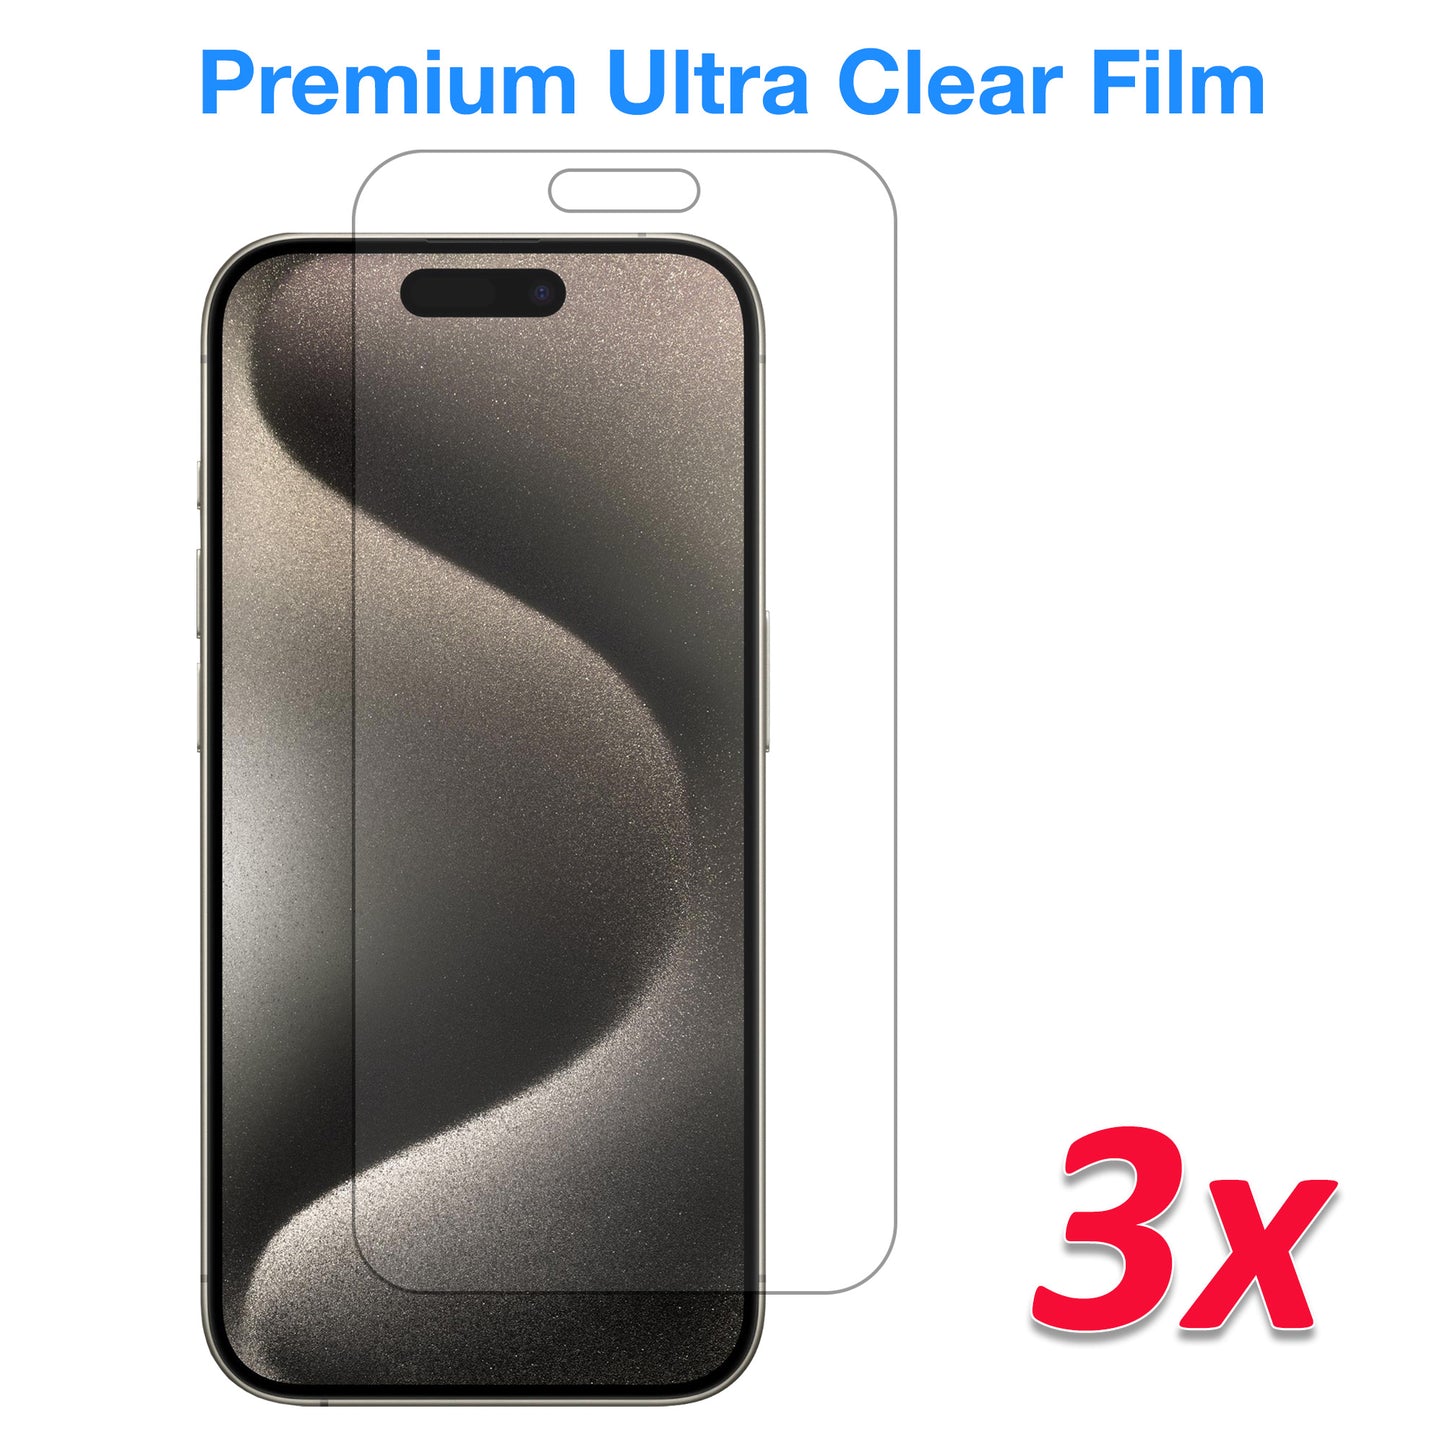 [3 Pack] MEZON Ultra Clear Film for iPhone 15 Pro (6.1") Premium Case Friendly Screen Protector